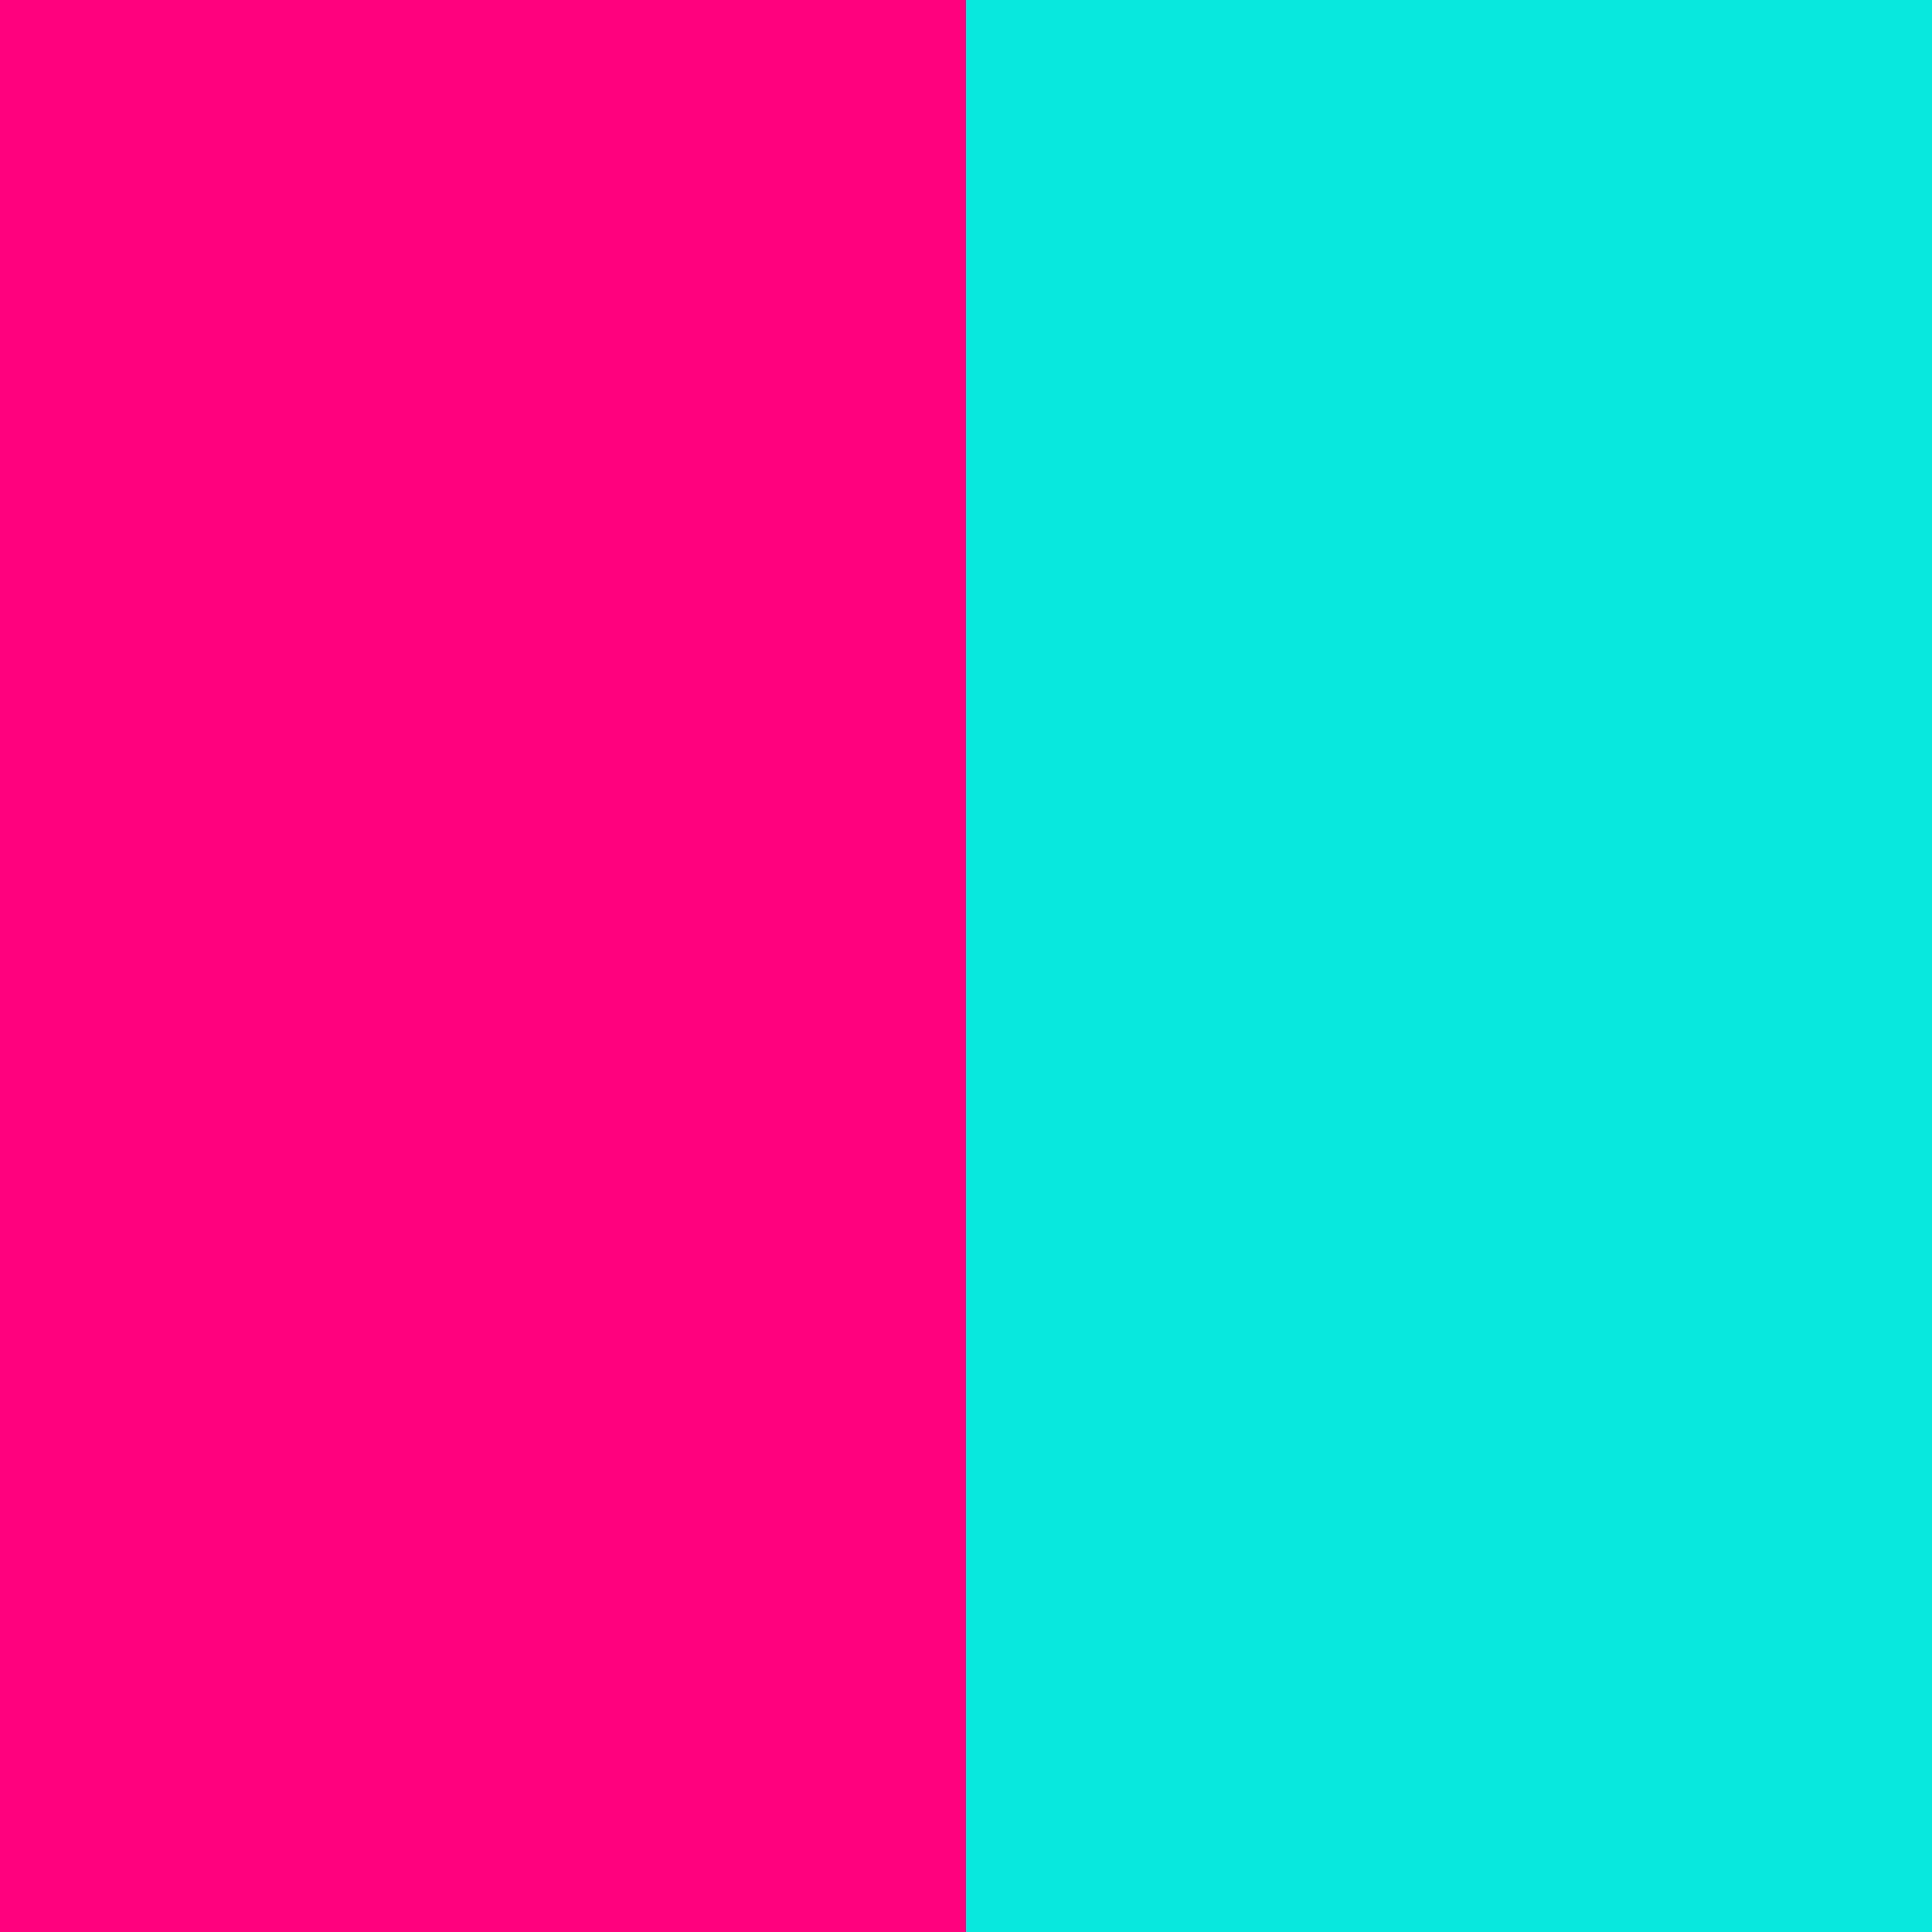 High Resolution Wallpaper | Pink Turquoise  2048x2048 px